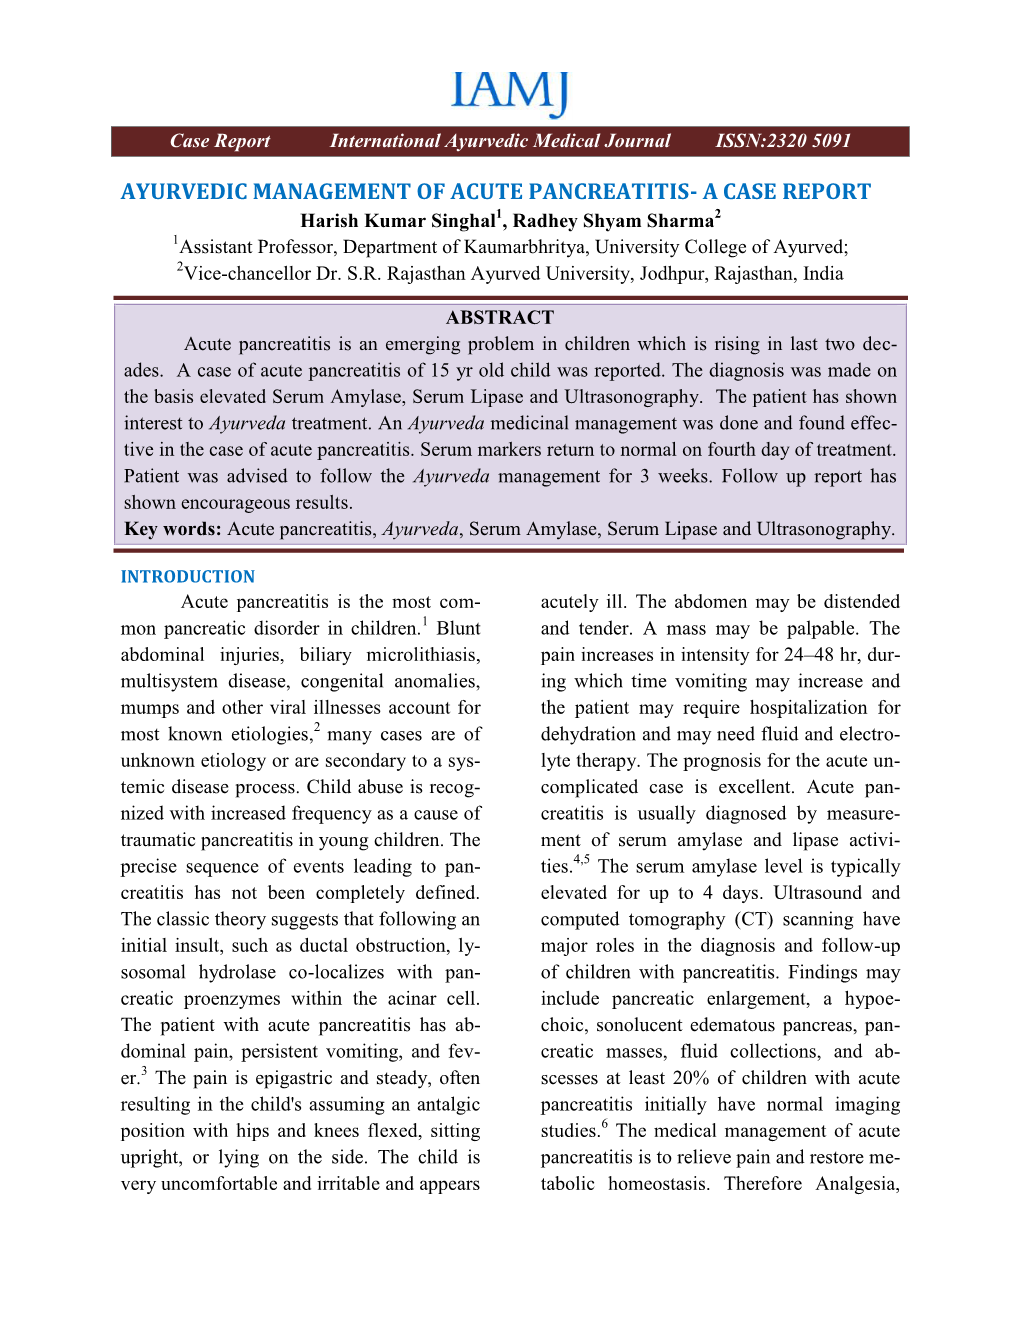 Ayurvedic Management of Acut Anagement of Acute Pancreatitis- a Case Report Itis- a Case Report